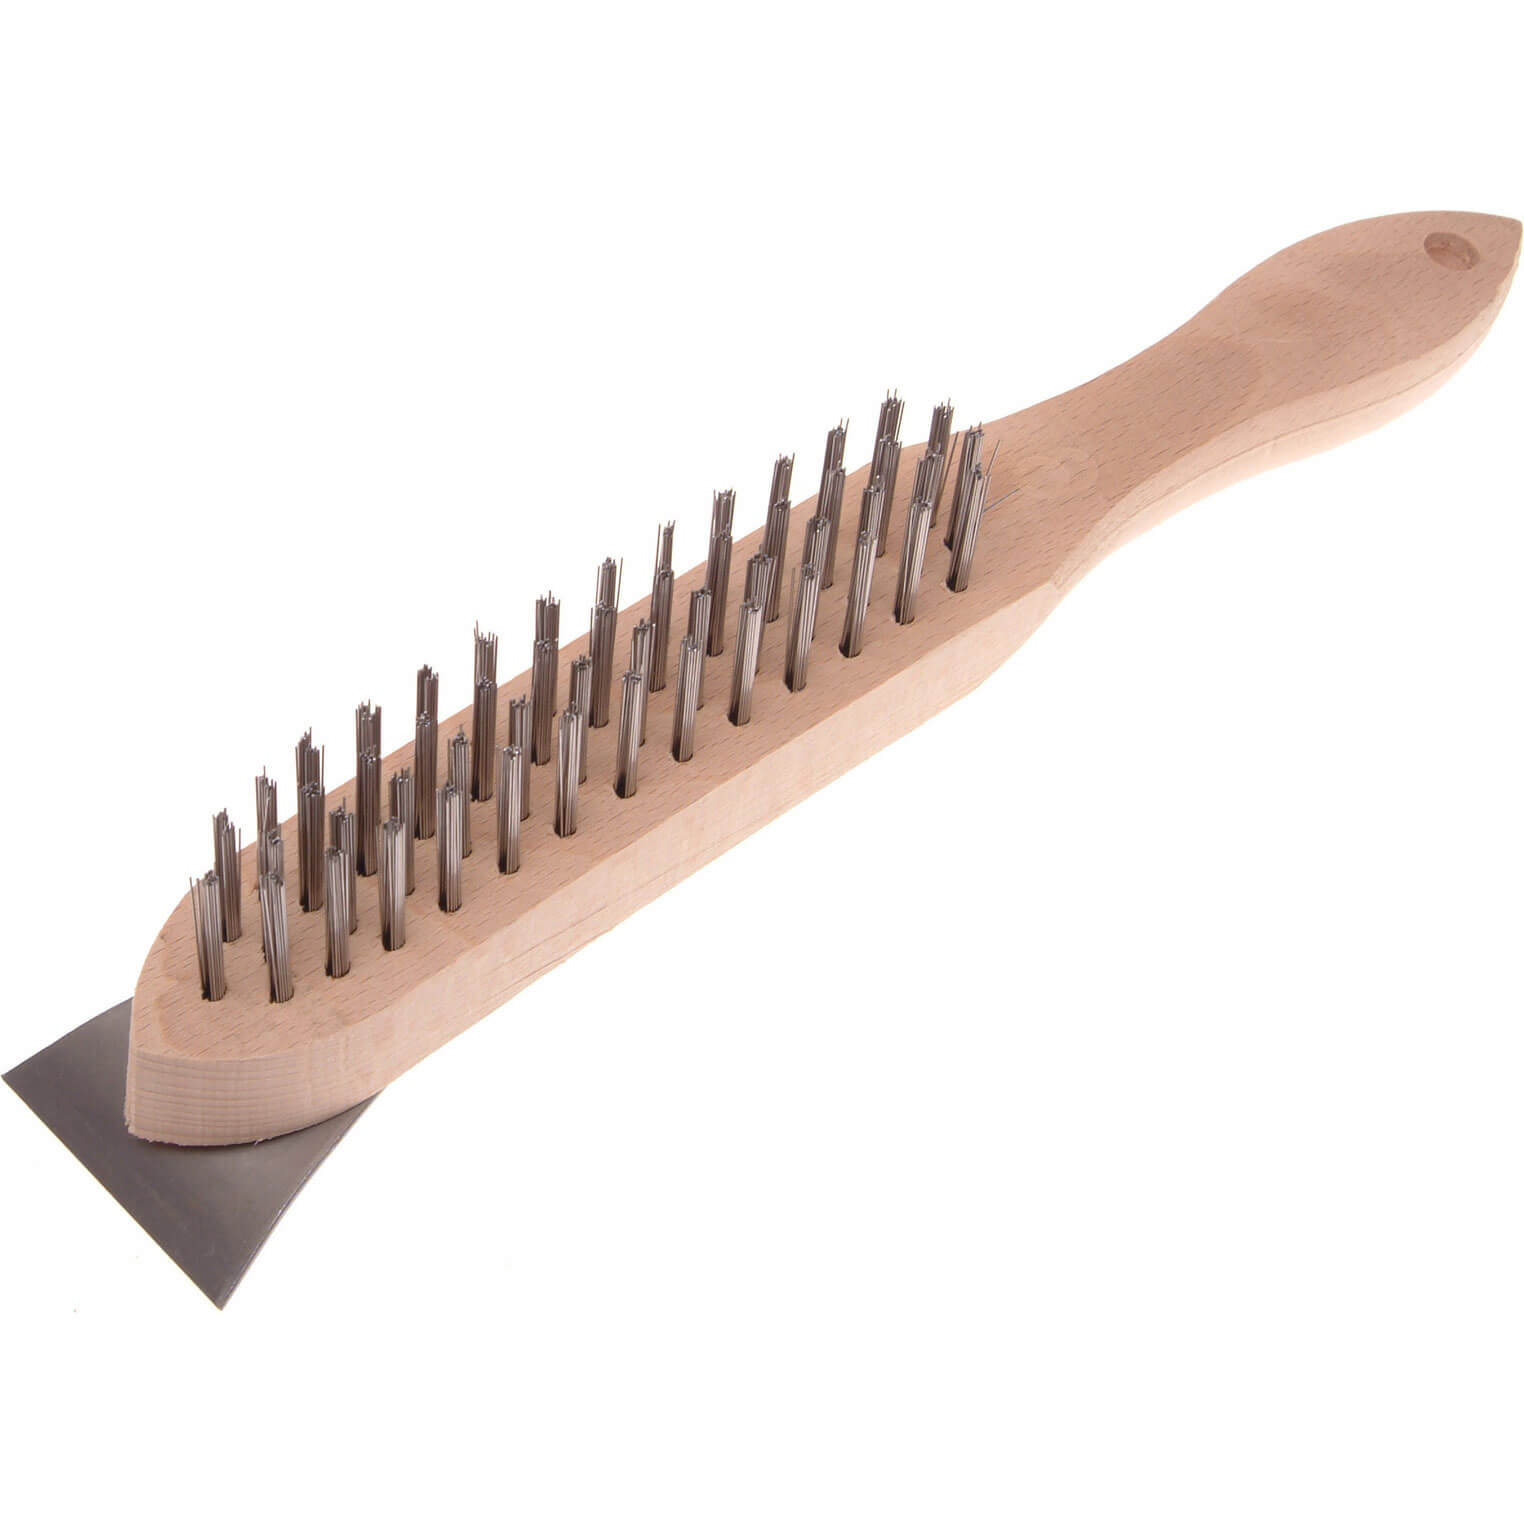 Photos - Other Hand Tools Faithfull Lightweight Wire Scratch Brush and Scraper 4 Rows FAI5804S 